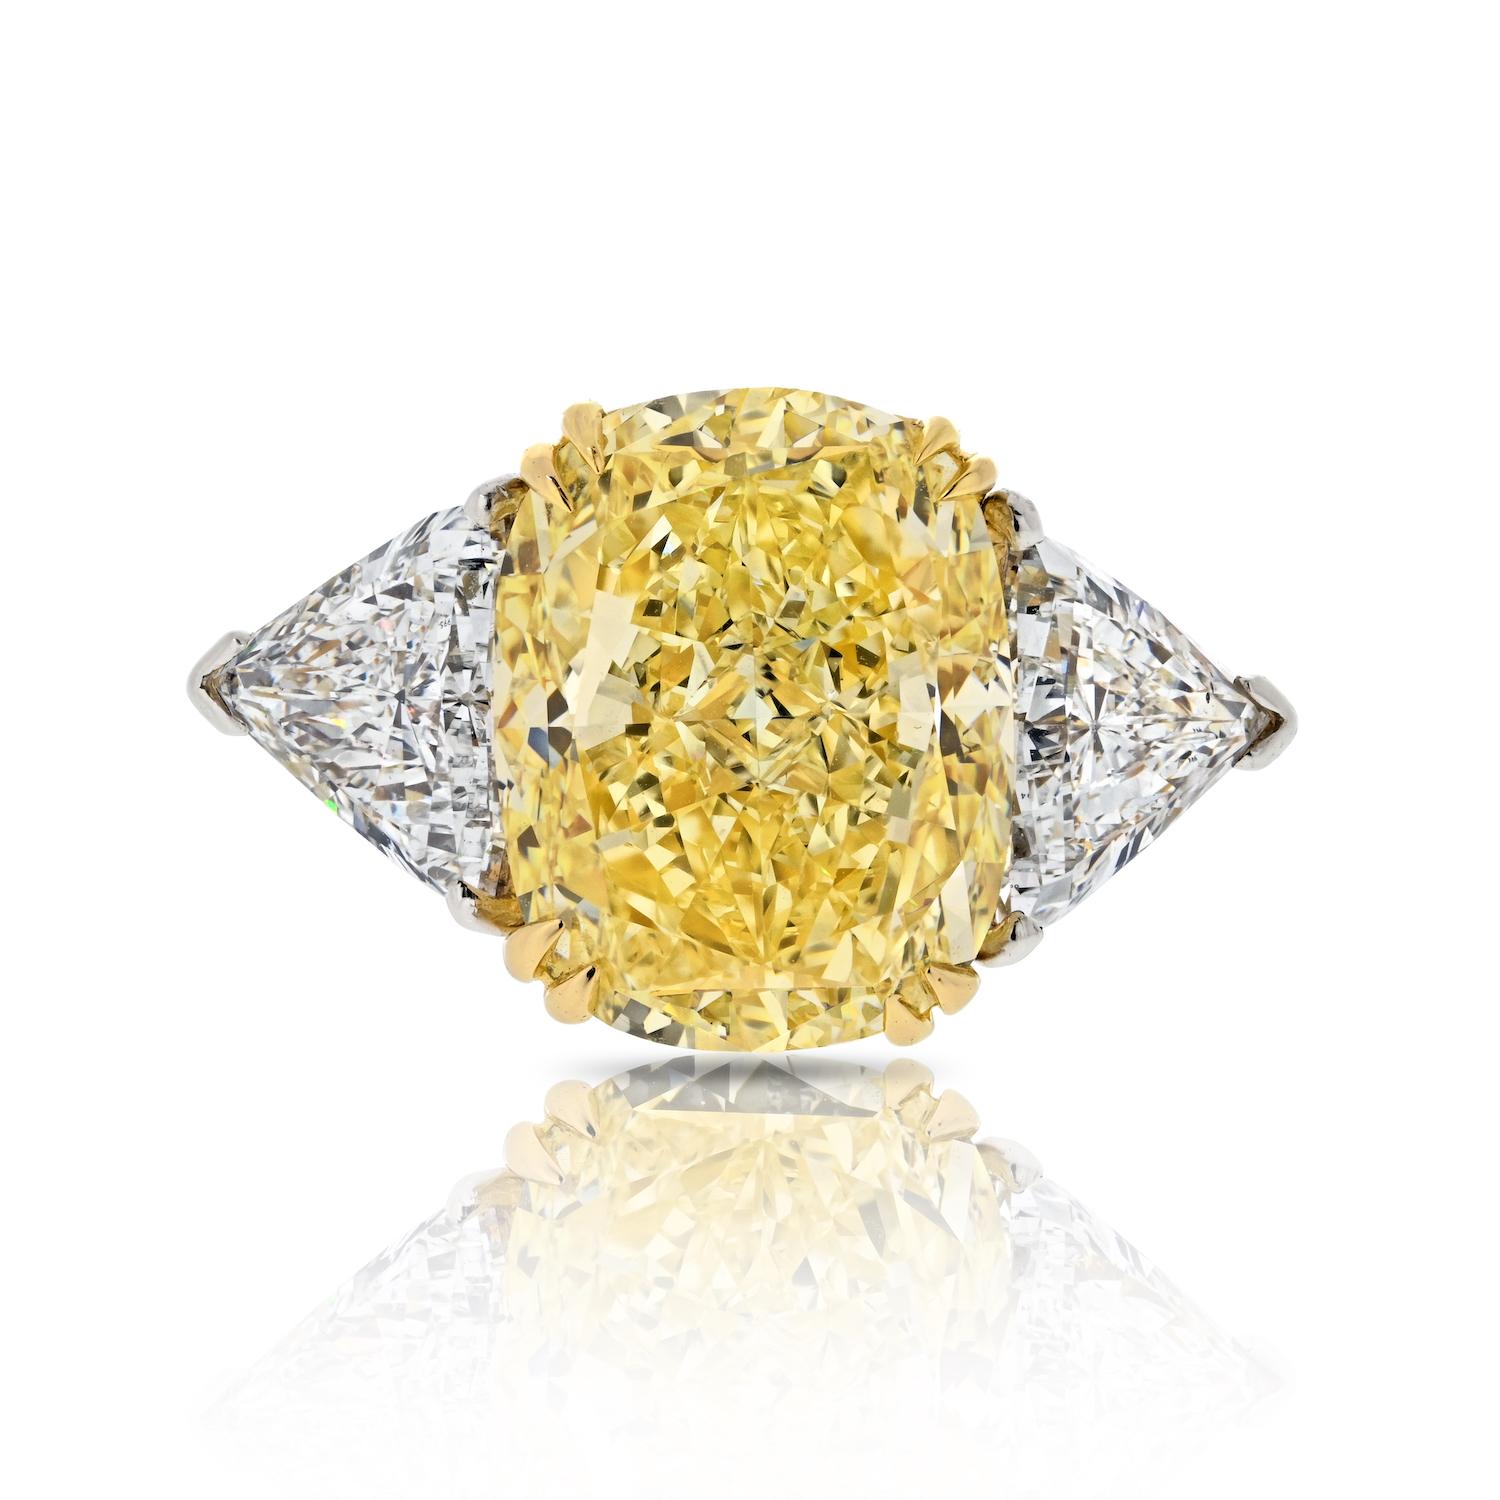 White diamonds will always have our hearts, but when it comes to rarer stones, yellow diamonds have them beat. Not only are they exceptional, but they certainly stand out in a sea of colorless diamonds.

If you want a truly unique engagement ring,